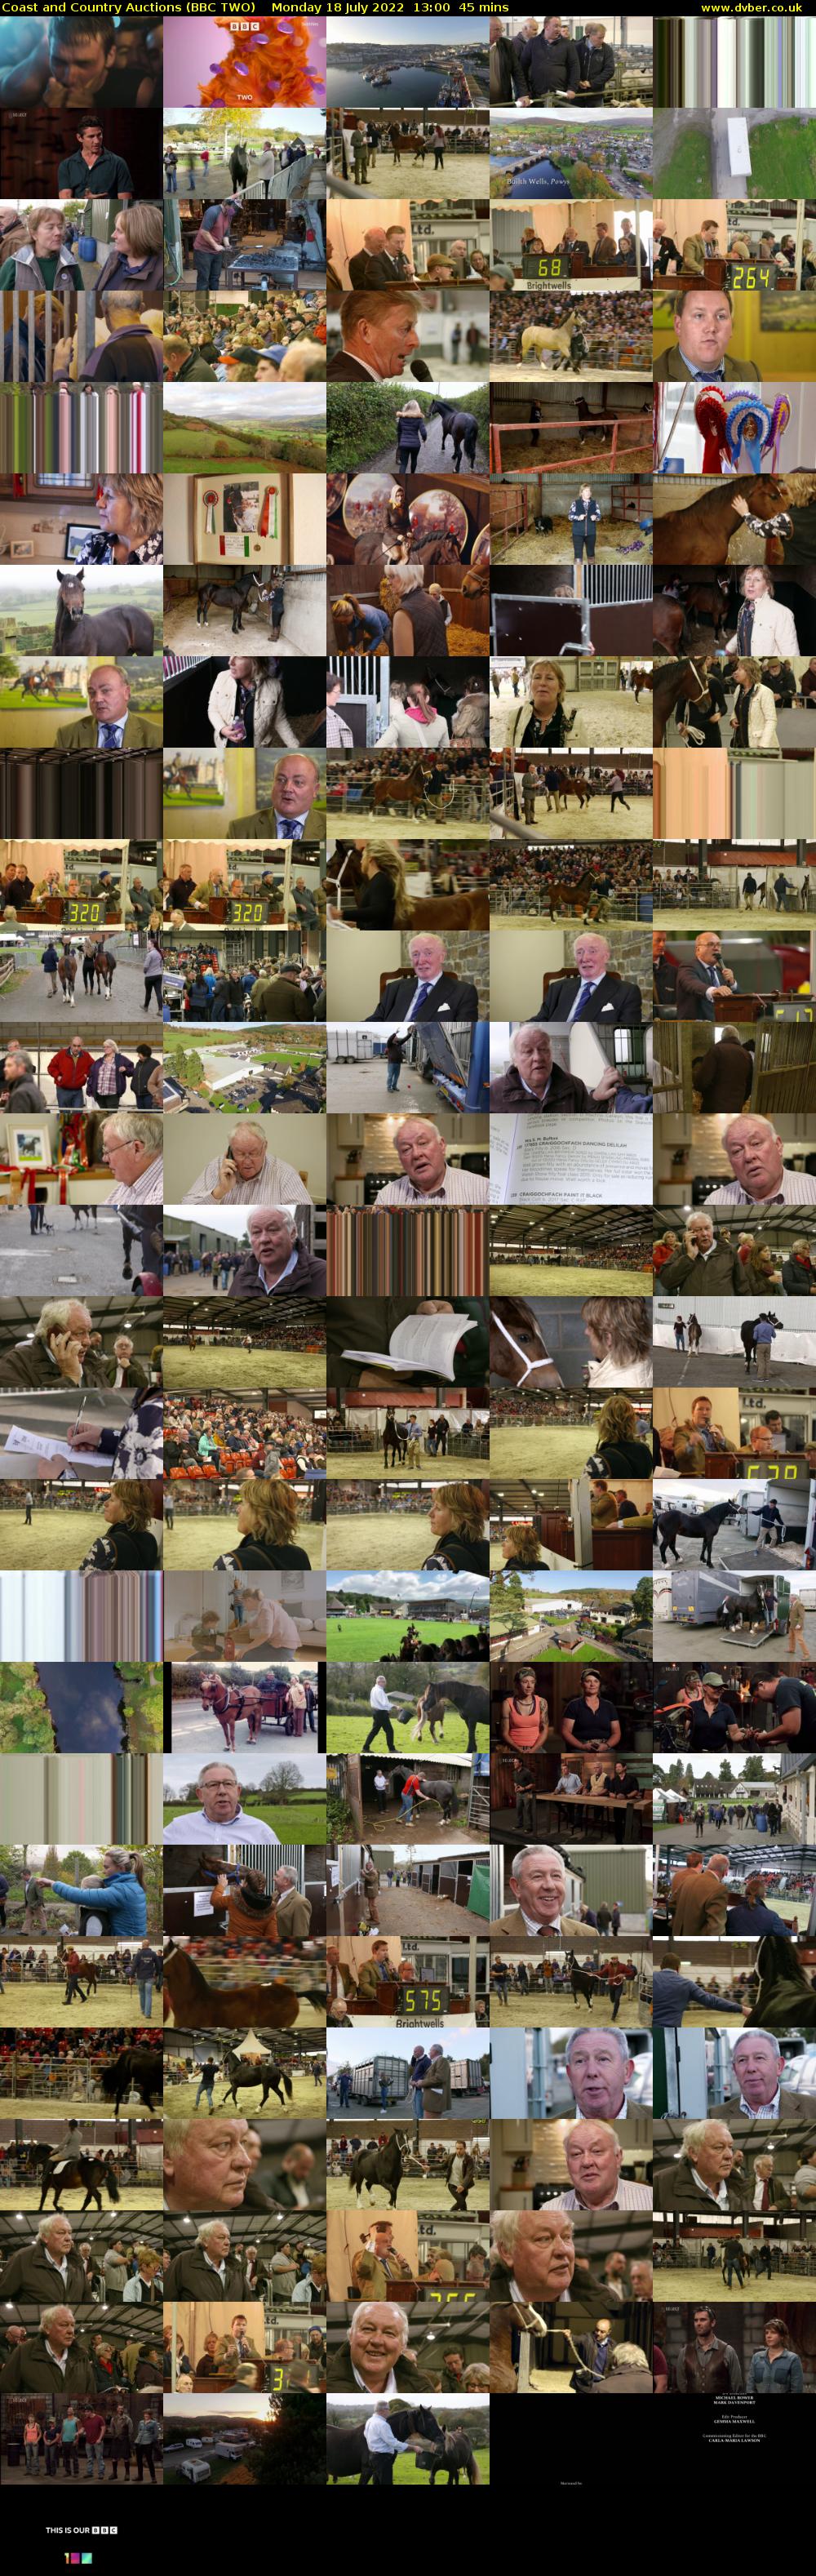 Coast and Country Auctions (BBC TWO) Monday 18 July 2022 13:00 - 13:45